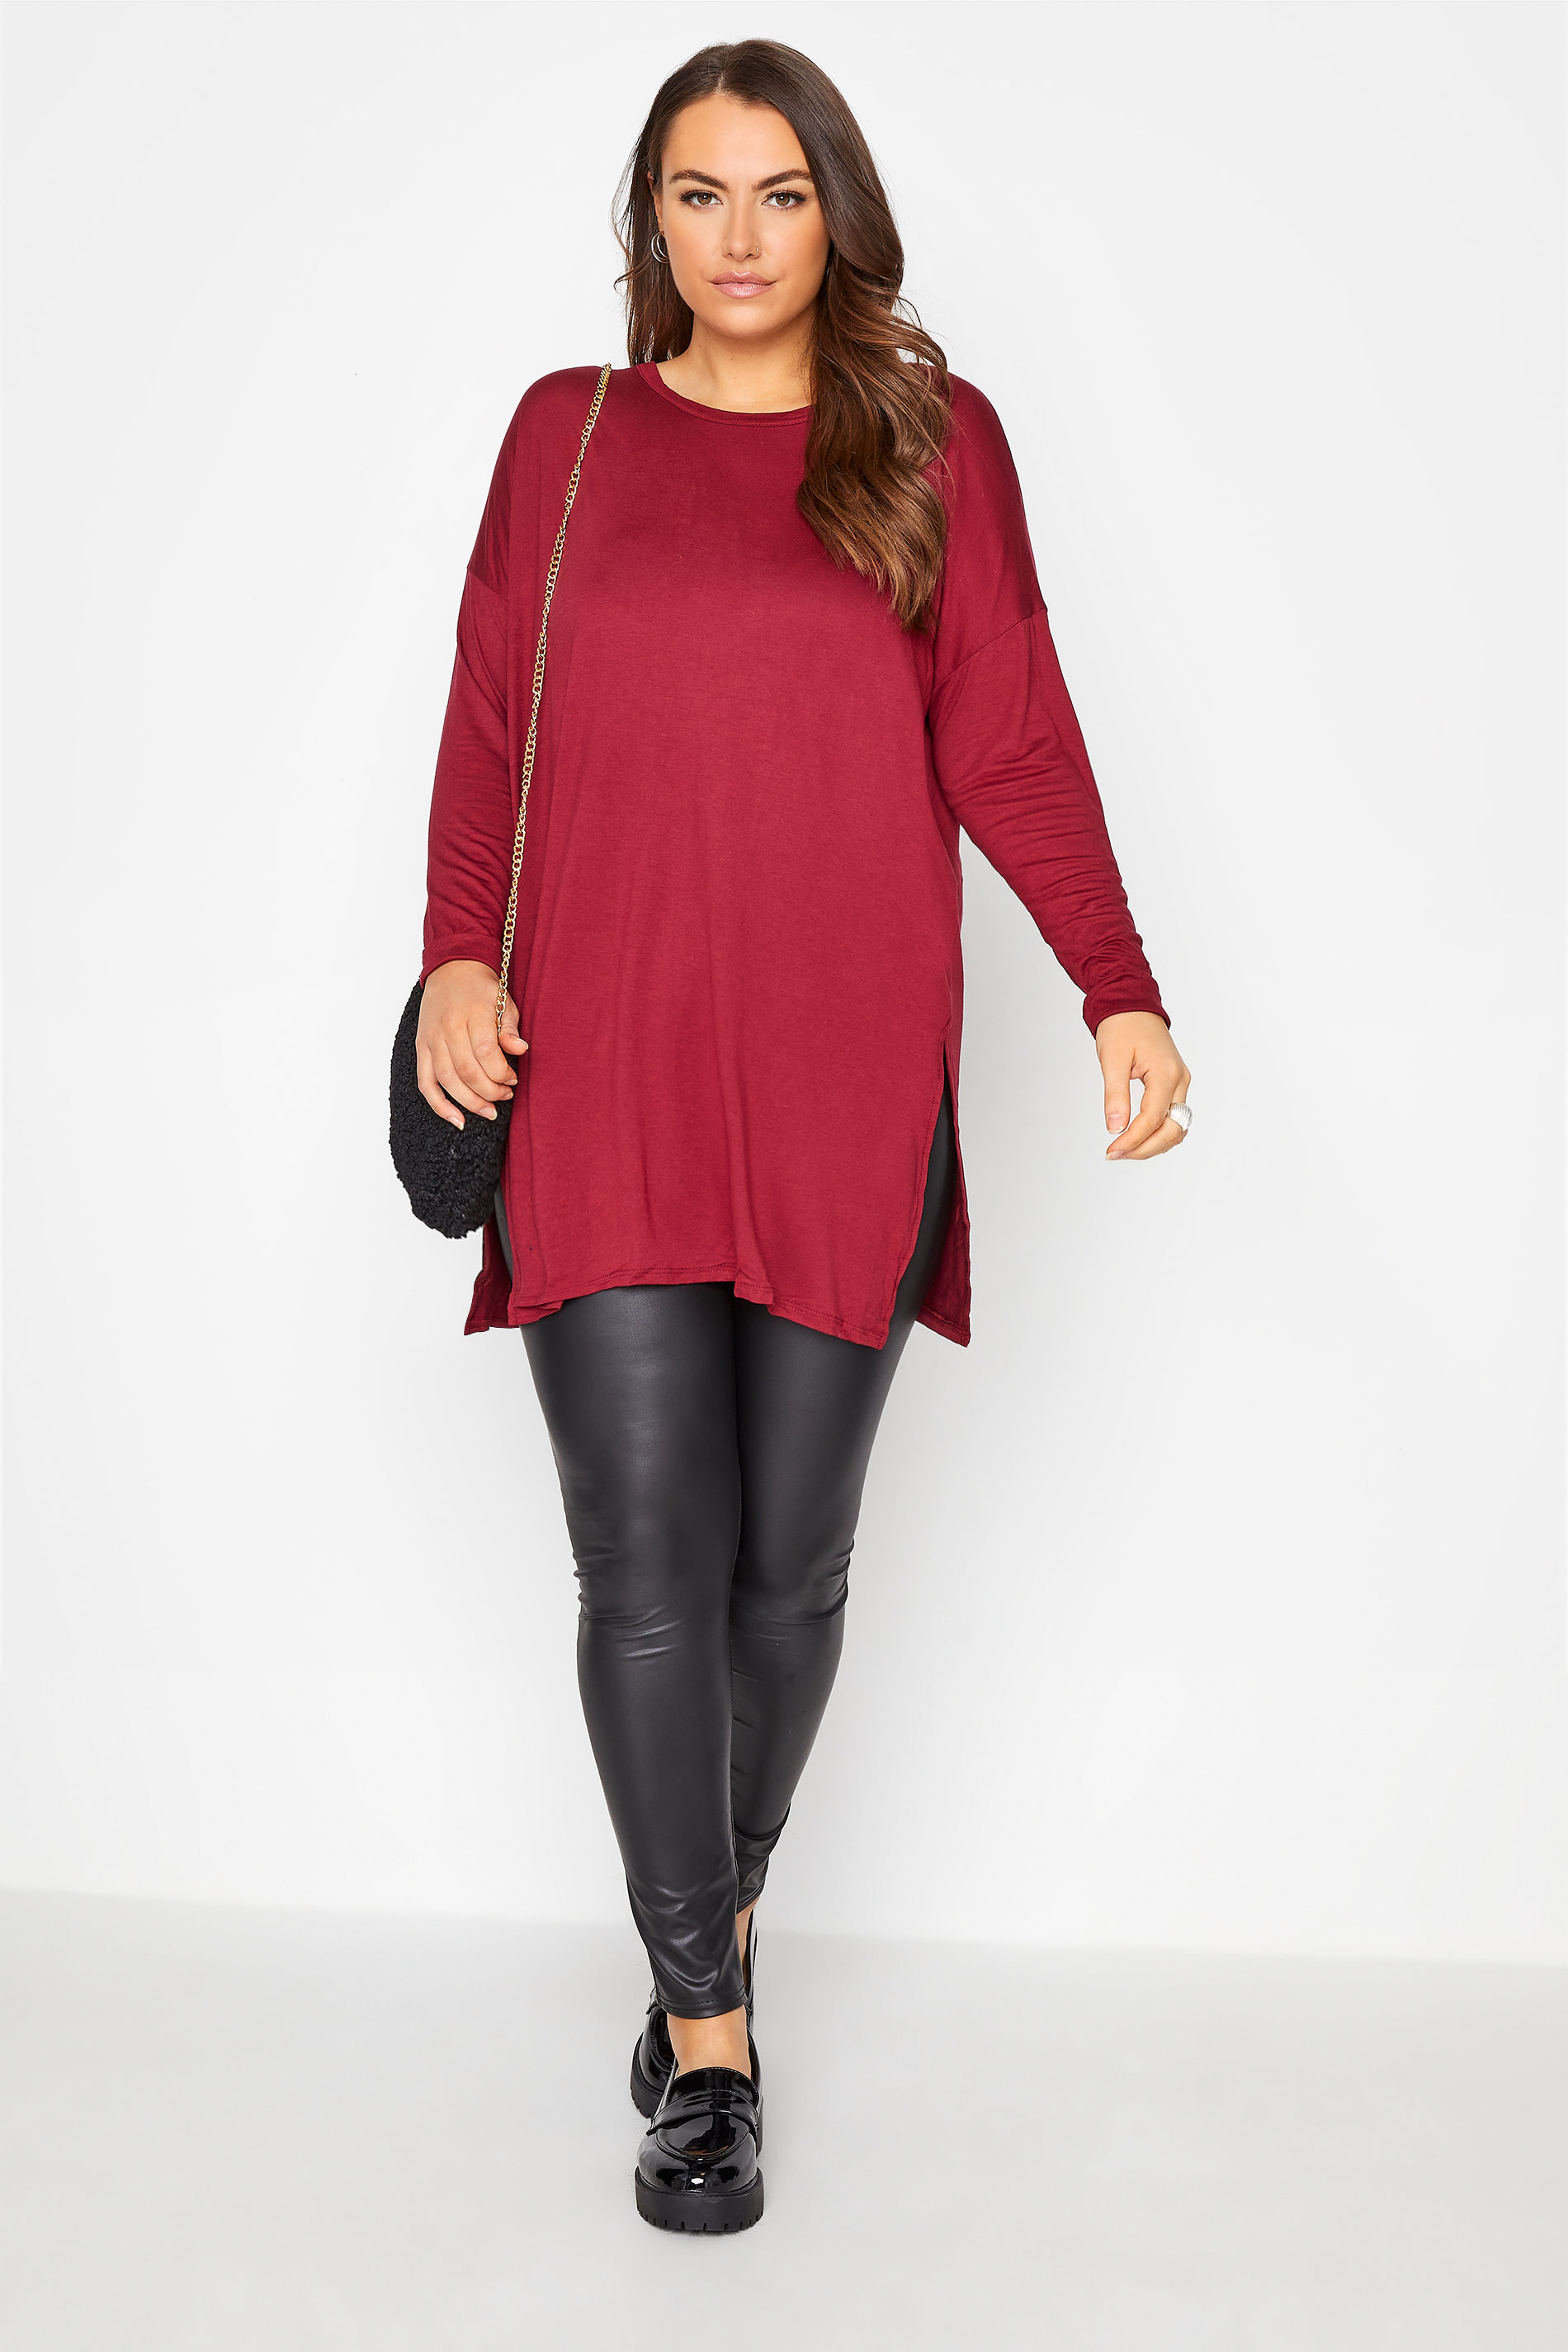 Grande taille  Tops Grande taille  Tops à Manches Longues | T-Shirt Rouge Vin Long Style Oversize - BK48551